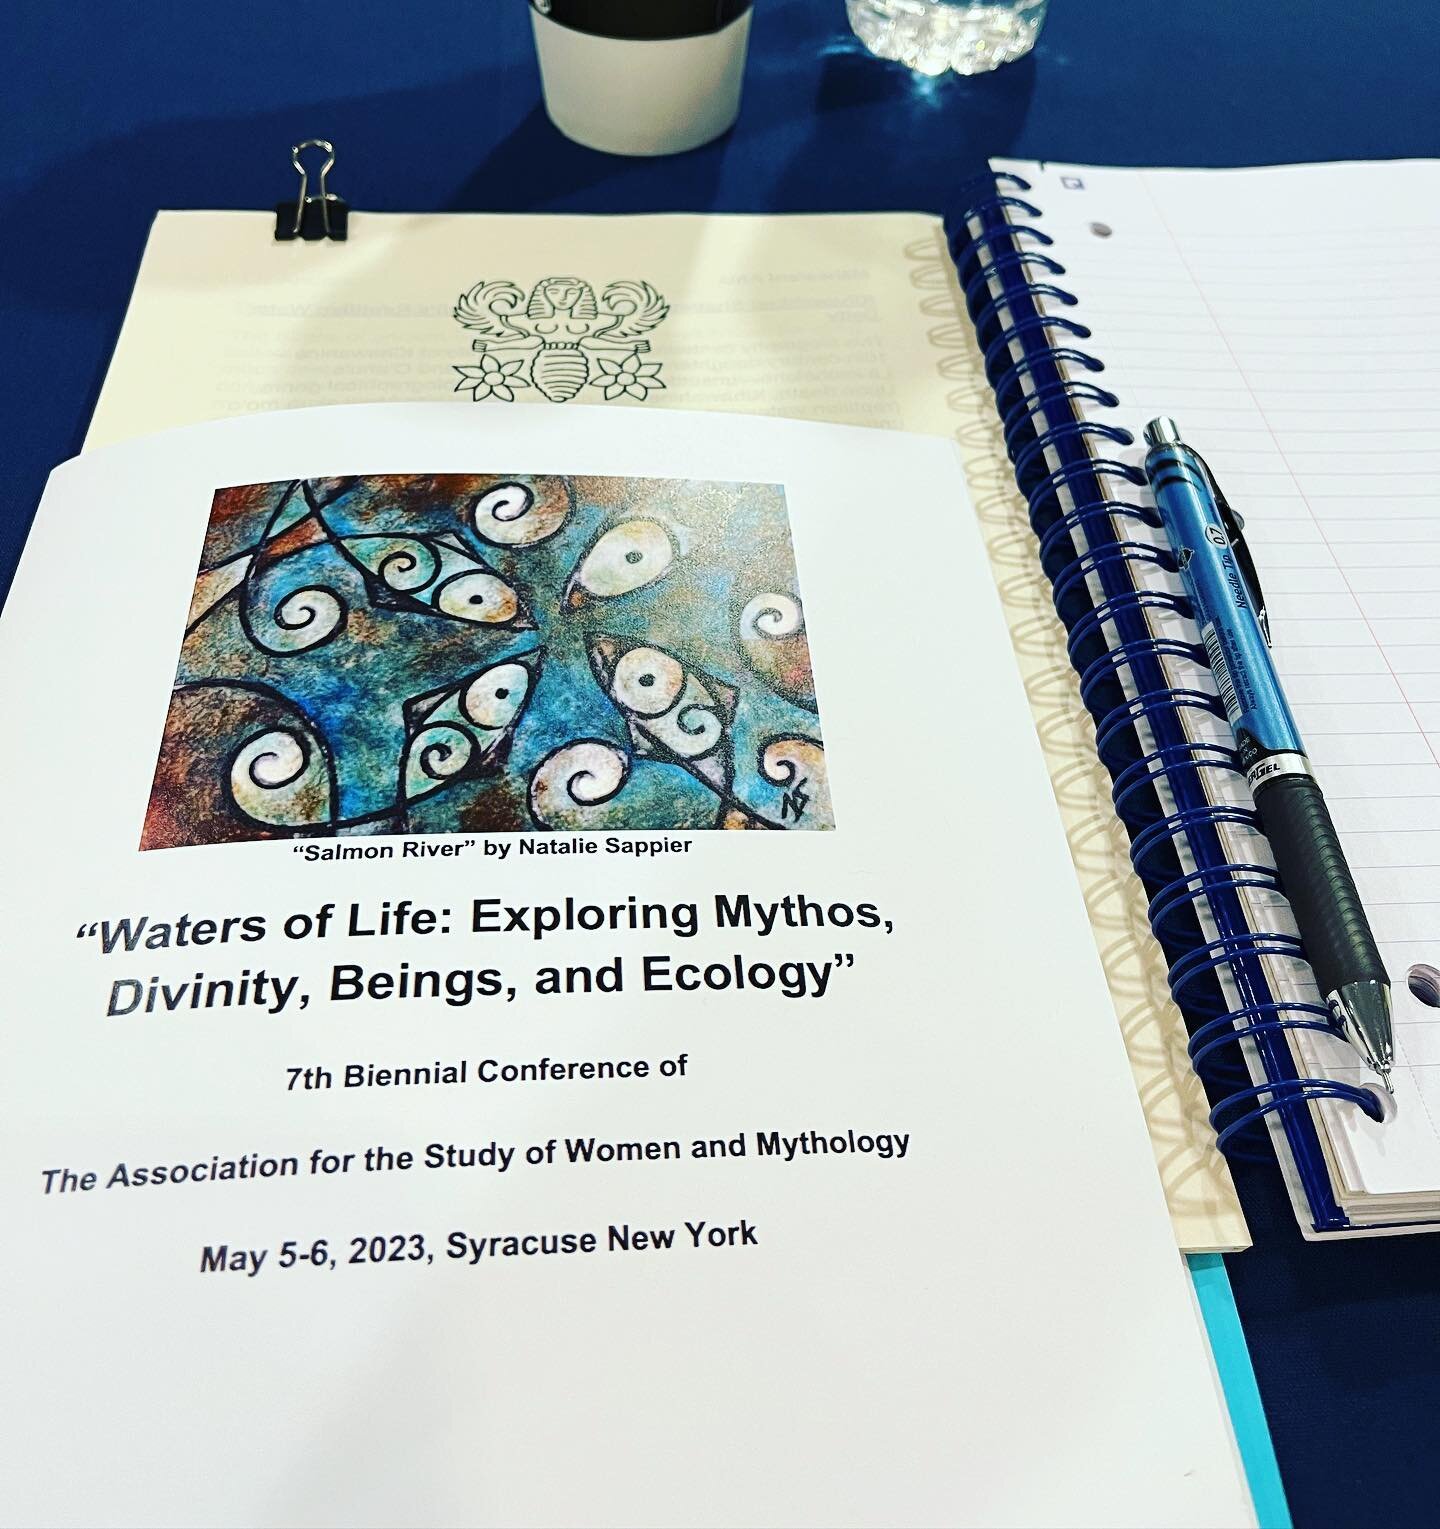 Keynote with Hallie Iglehart Austen is underway- &lsquo;Reweaving the Web of Life: New Myths for Restoring the Waters and Ourselves&rsquo; at the Association for Study of Women and Mythology conference. Looking forward to presenting this afternoon! ?